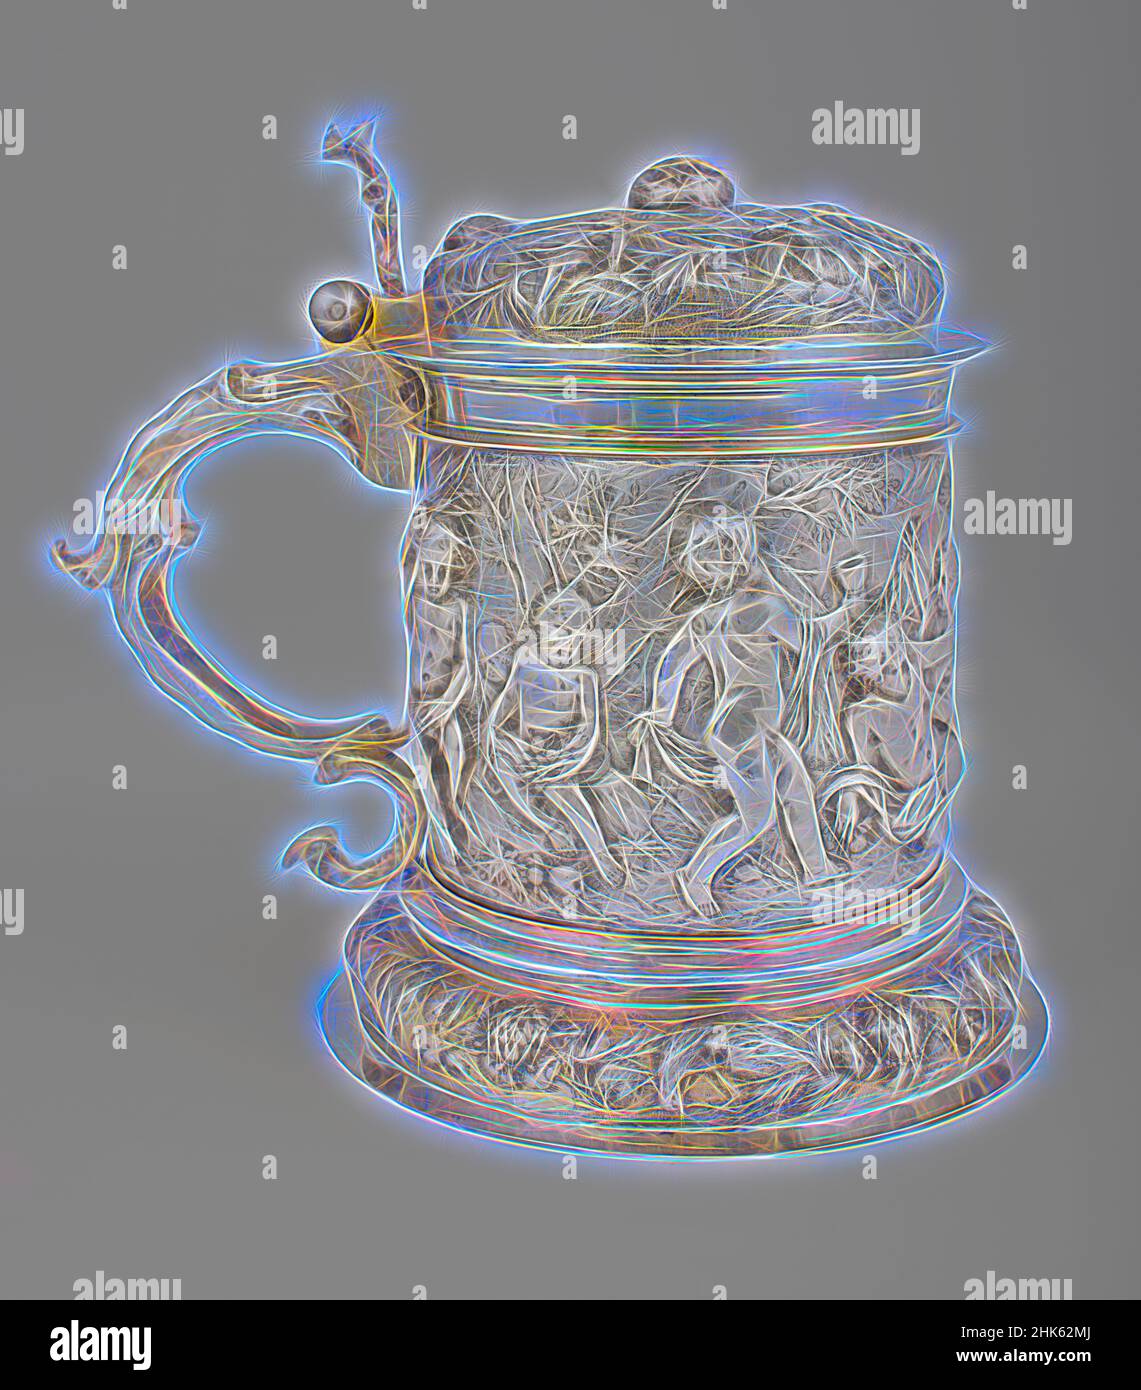 Inspired by Tankard, Peter Öhr I, German, master 1649, died 1662, 1650–60, Silver with gilding, Made in Hamburg, Germany, Europe, Metalwork, 9 3/8 × 10 1/2 × 7 5/8 in. (23.8 × 26.7 × 19.4 cm, Reimagined by Artotop. Classic art reinvented with a modern twist. Design of warm cheerful glowing of brightness and light ray radiance. Photography inspired by surrealism and futurism, embracing dynamic energy of modern technology, movement, speed and revolutionize culture Stock Photo